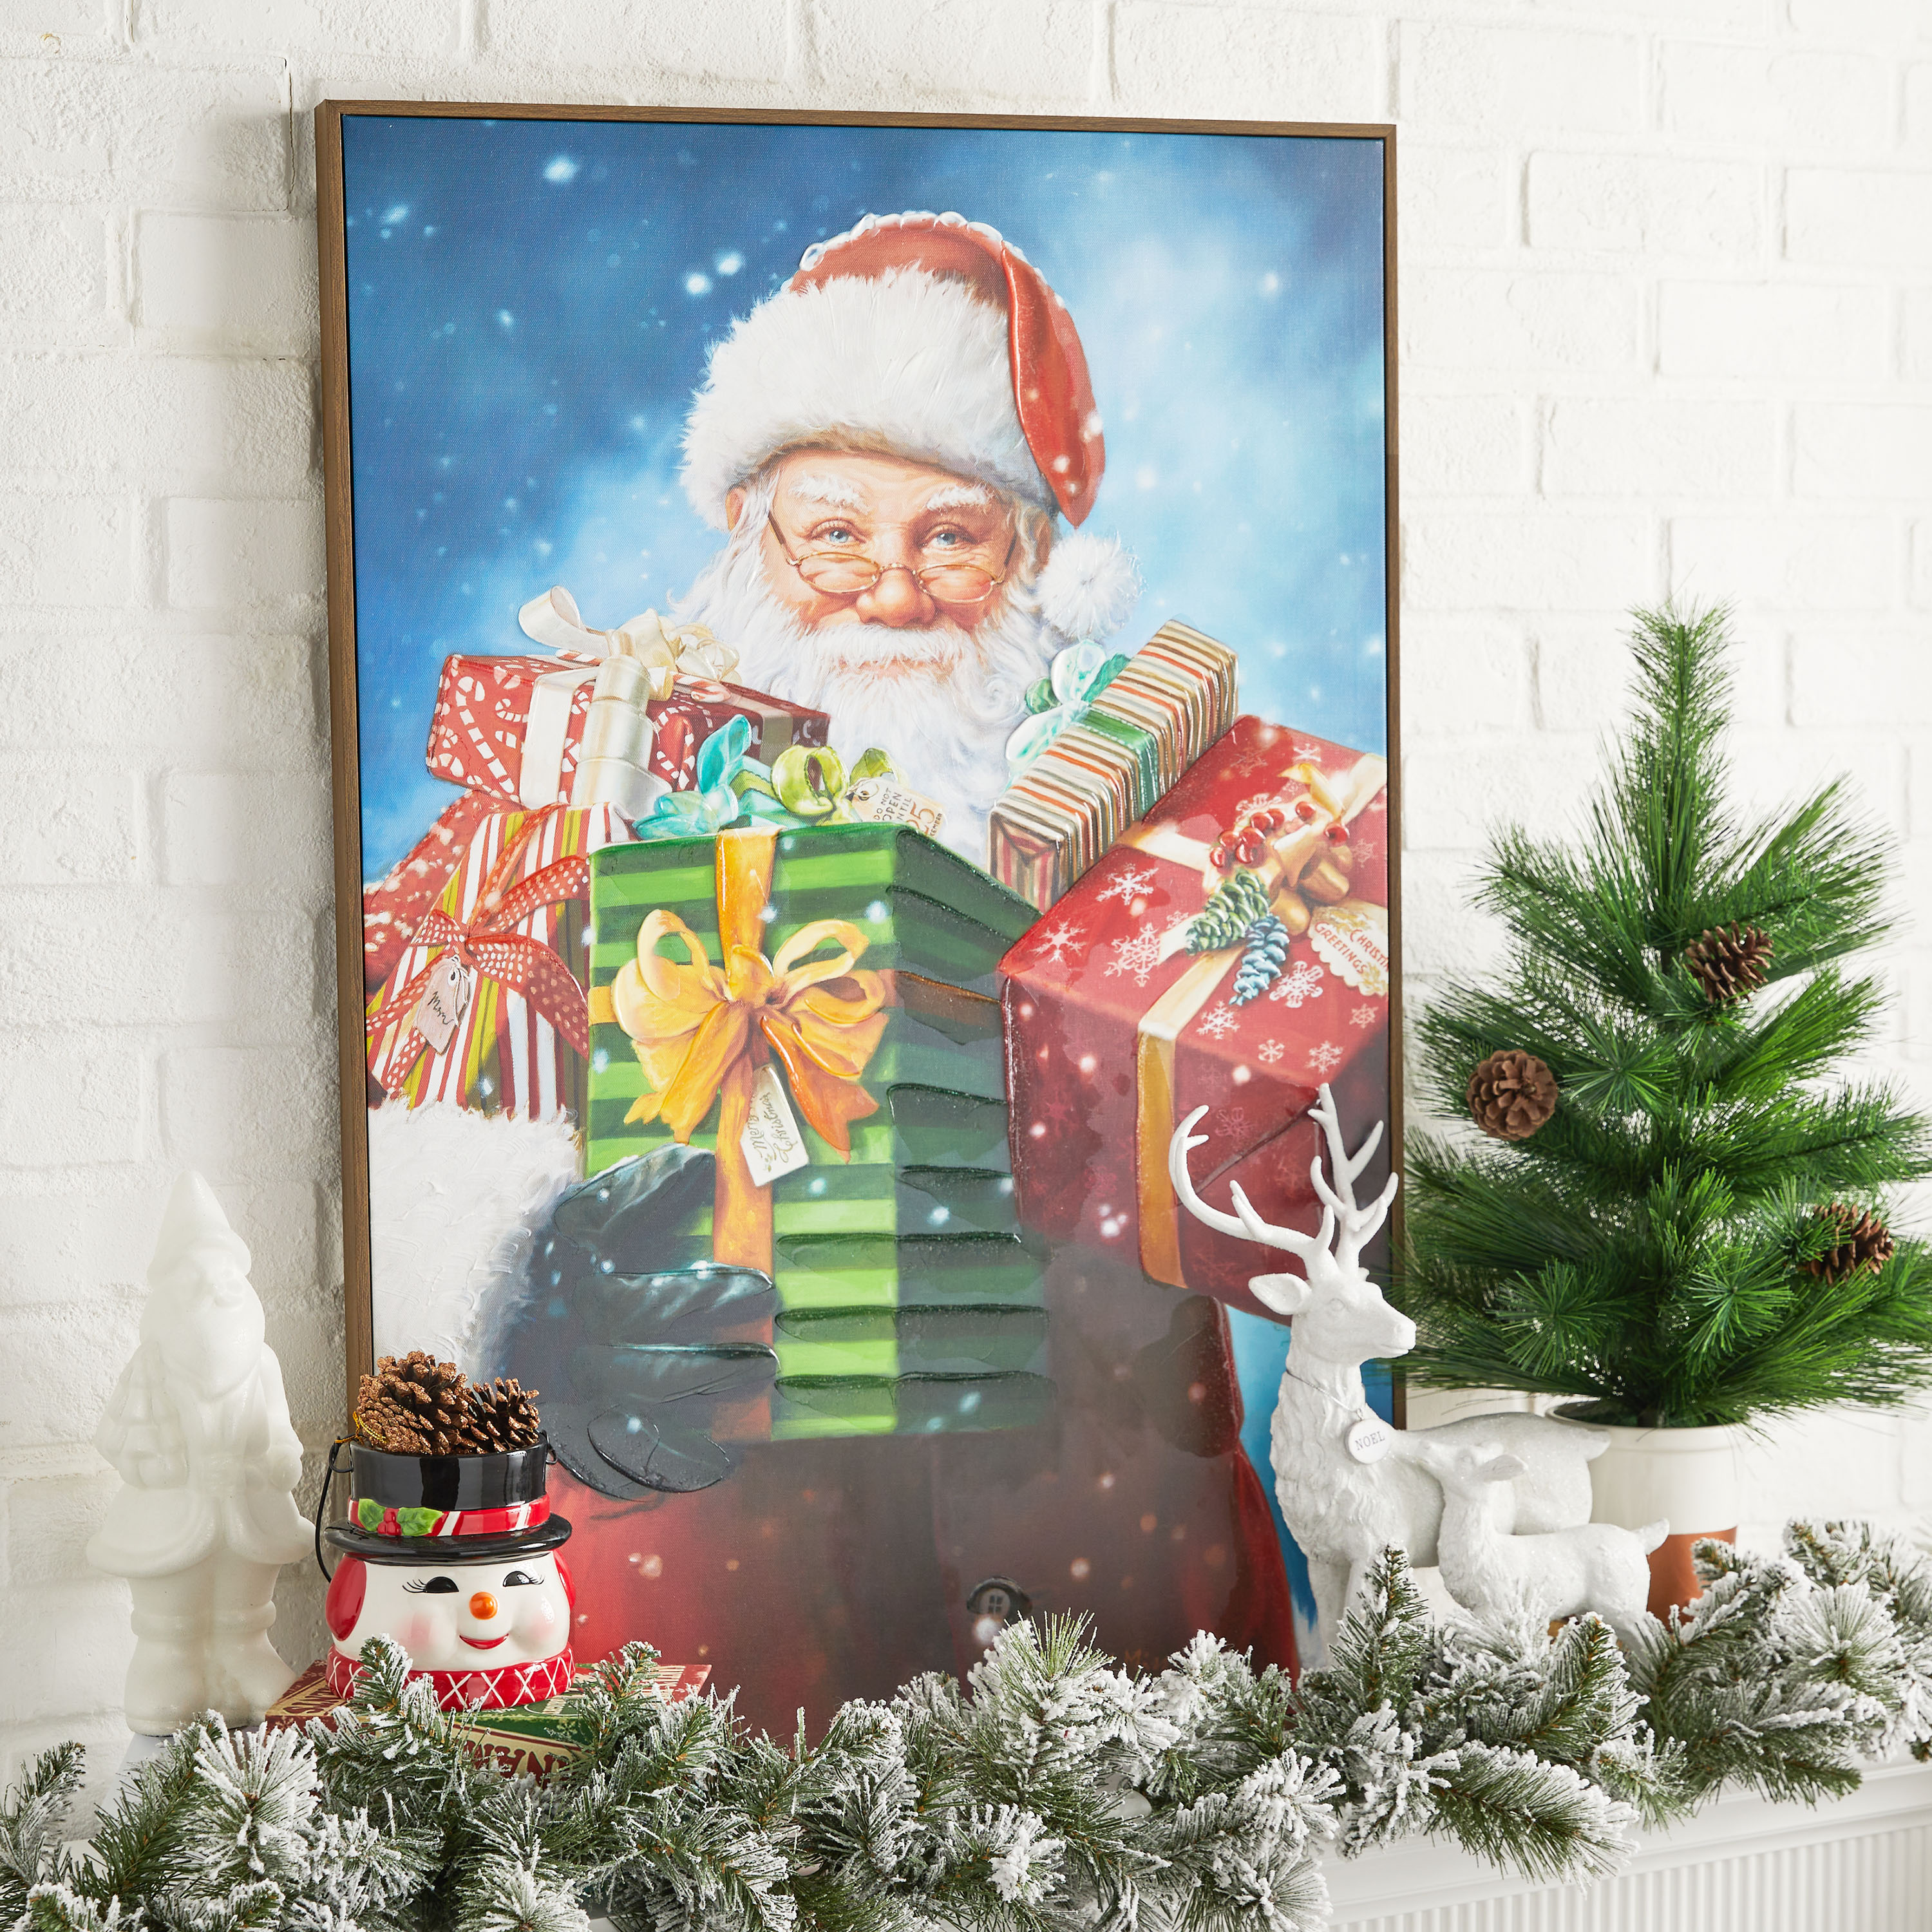 Holiday Time Santa Claus Hanging Sign Decoration - image 2 of 2